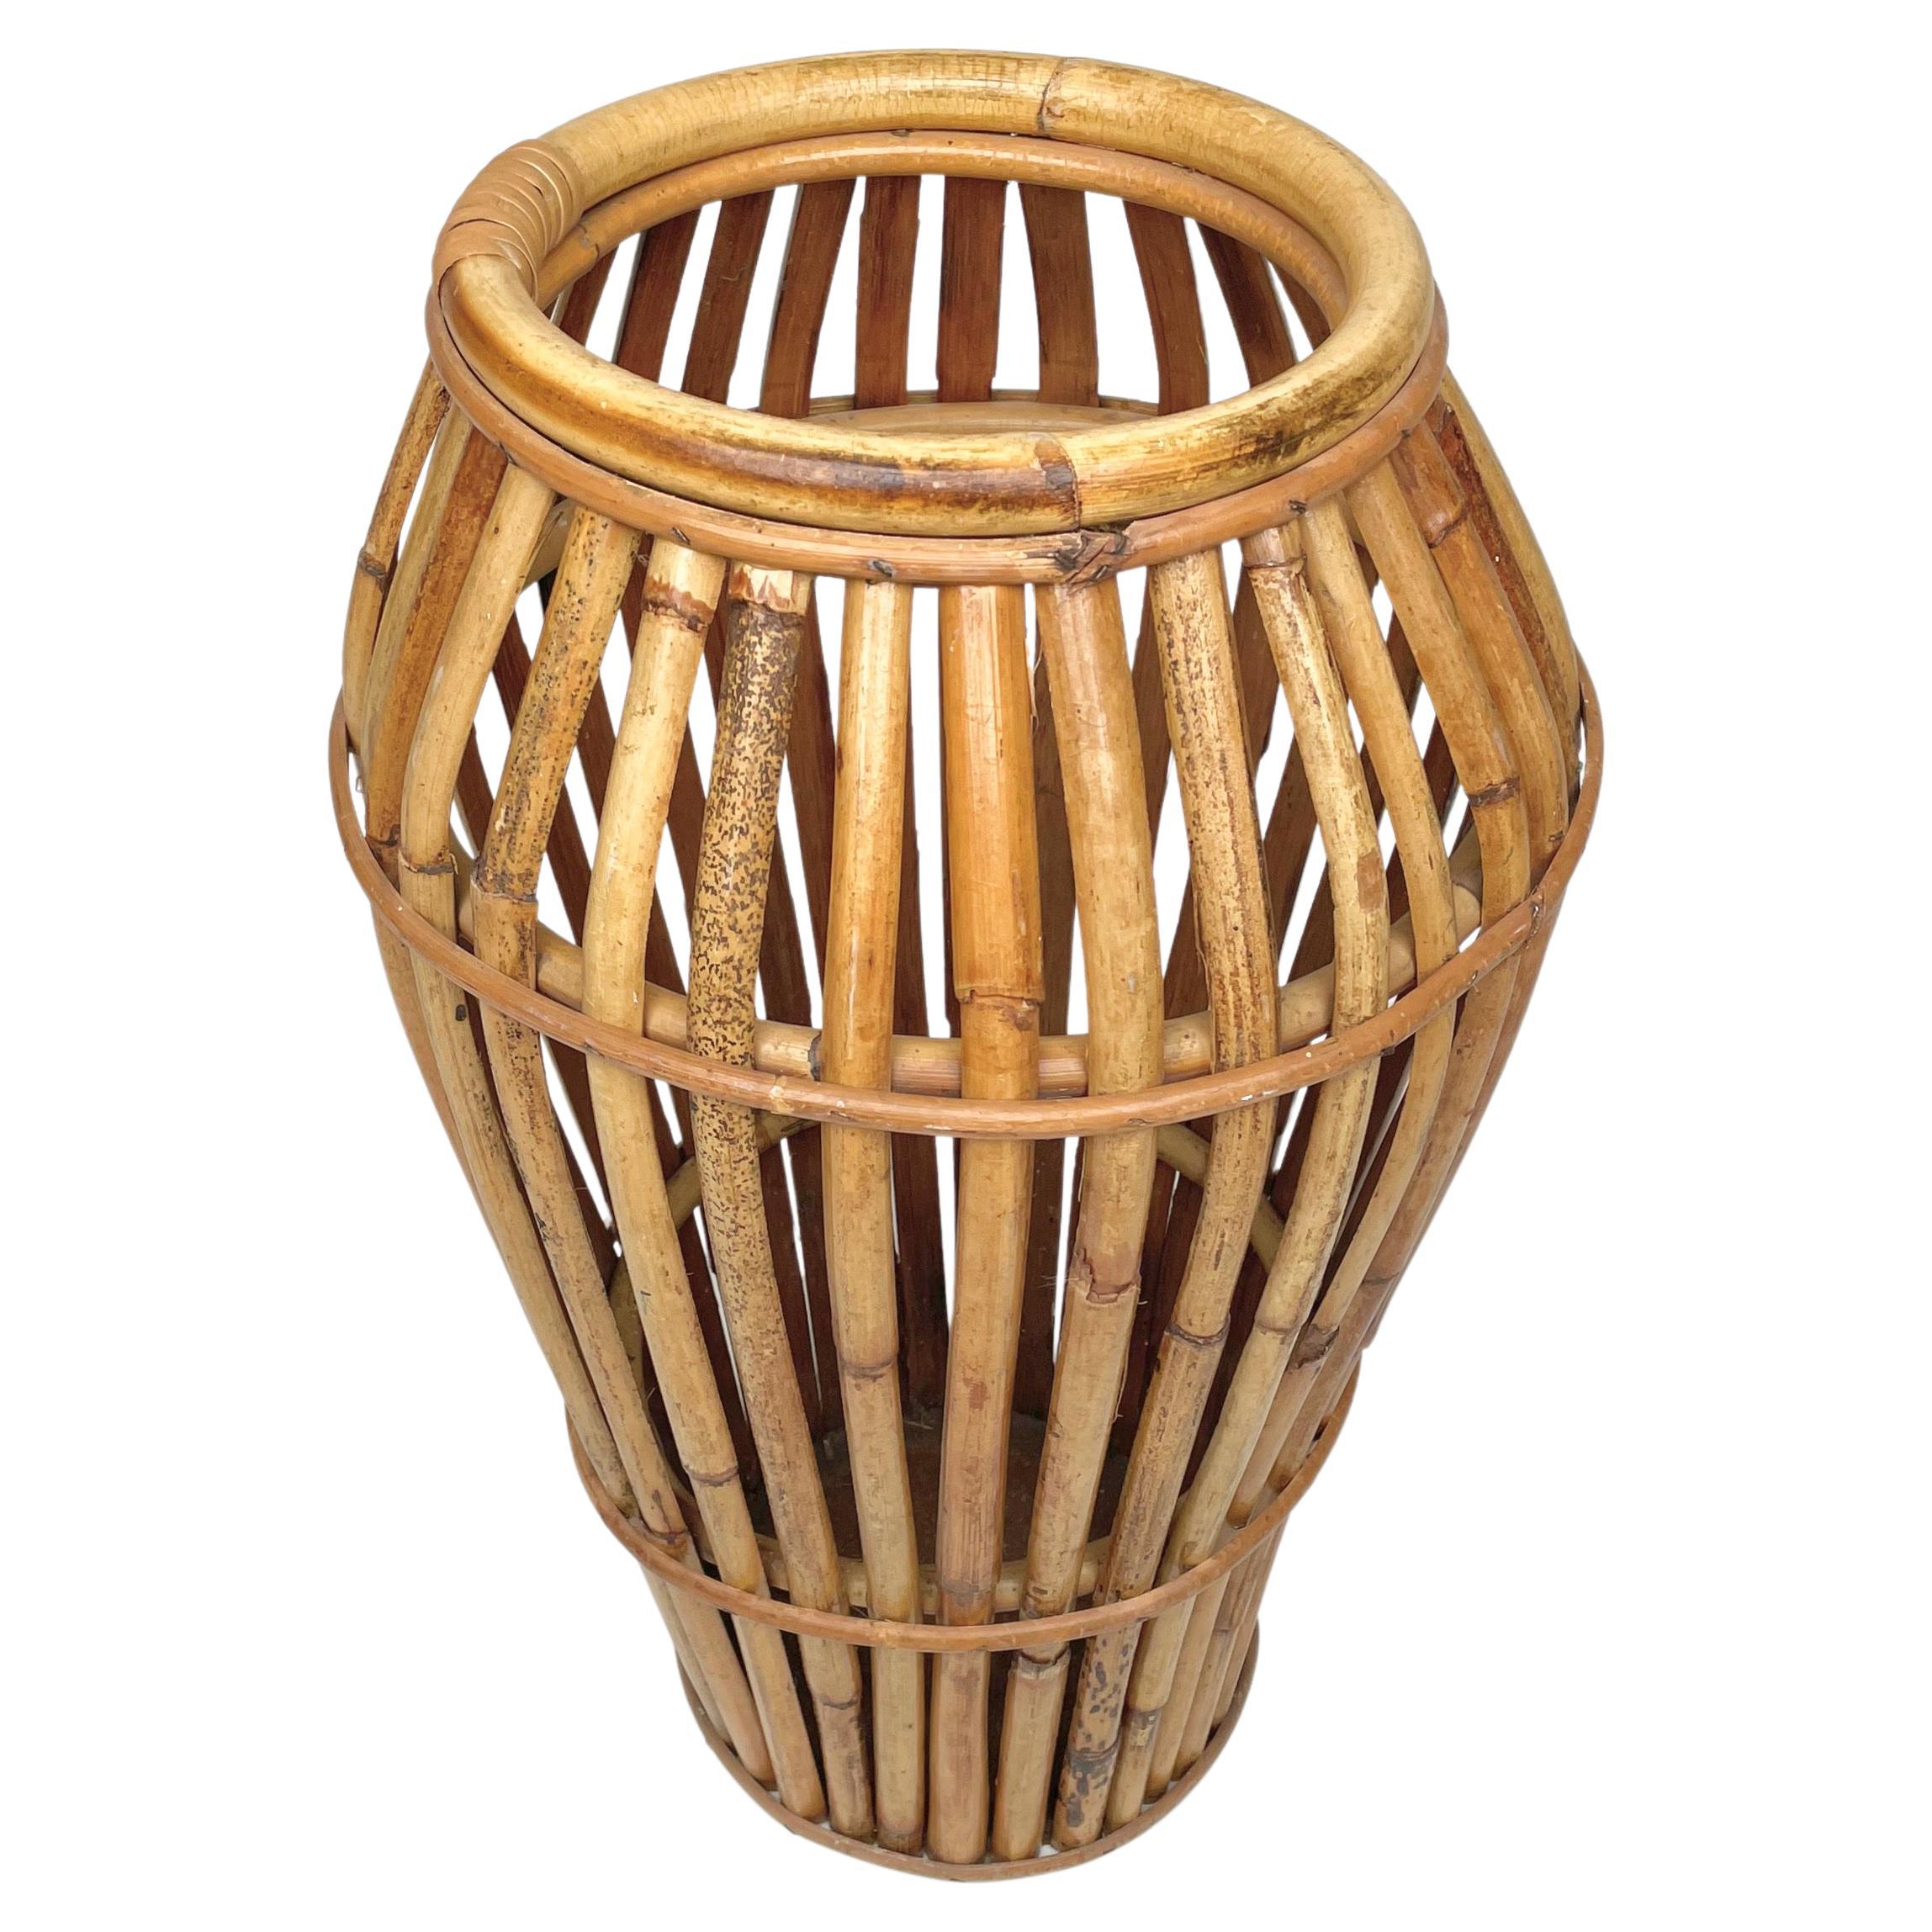 Umbrella stand in rattan and bamboo made in Italy in the 1960s.